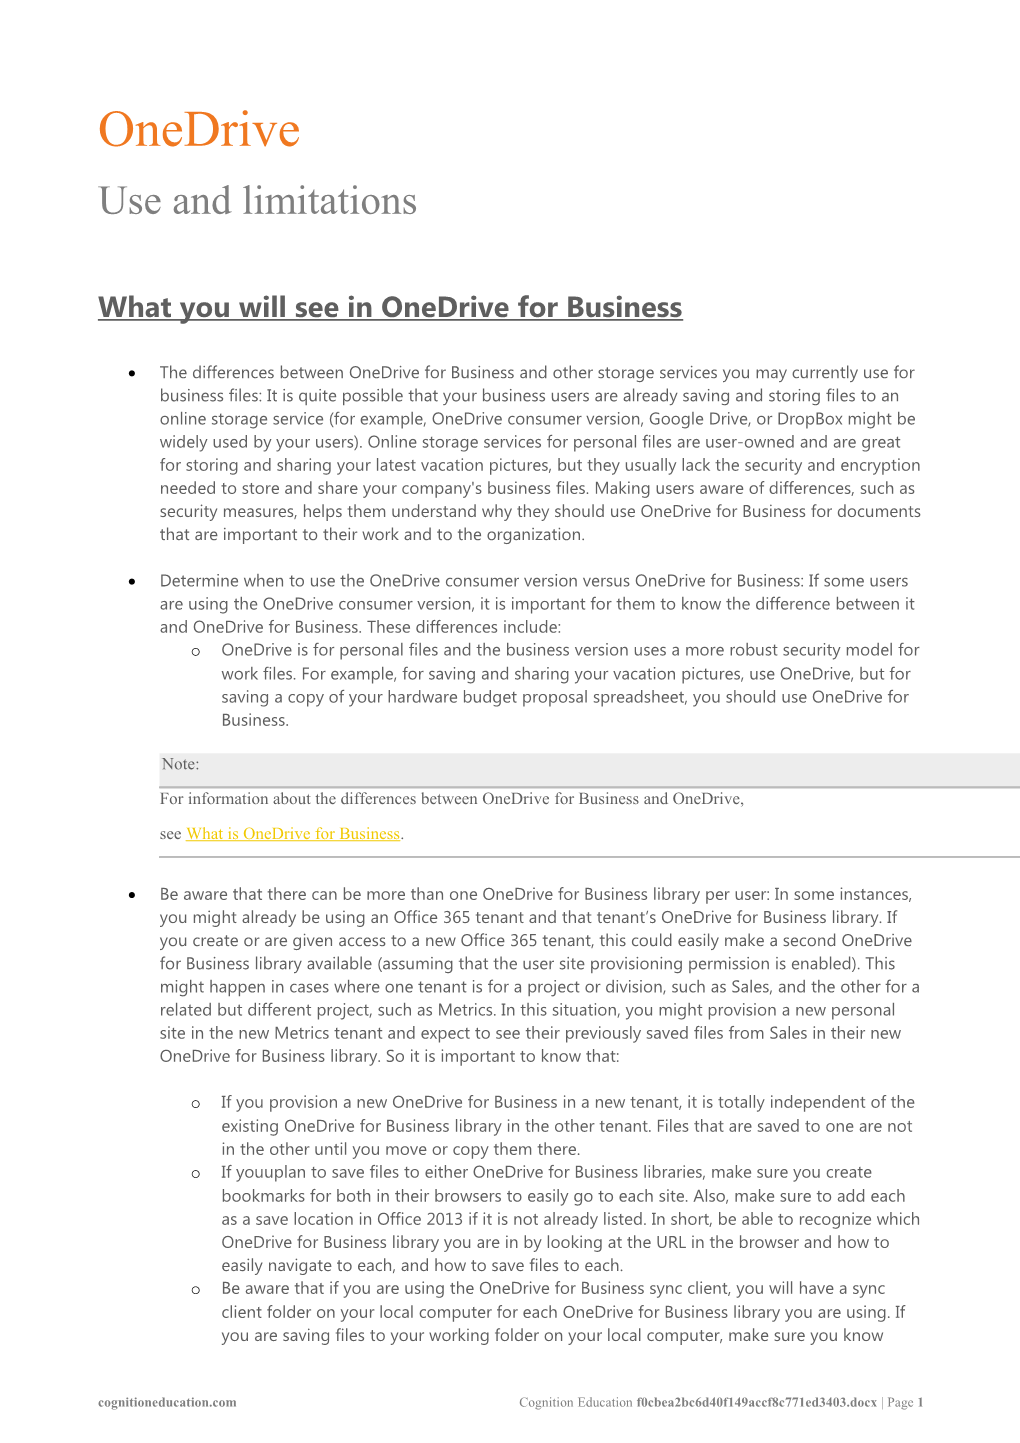 What You Will See in Onedrive for Business